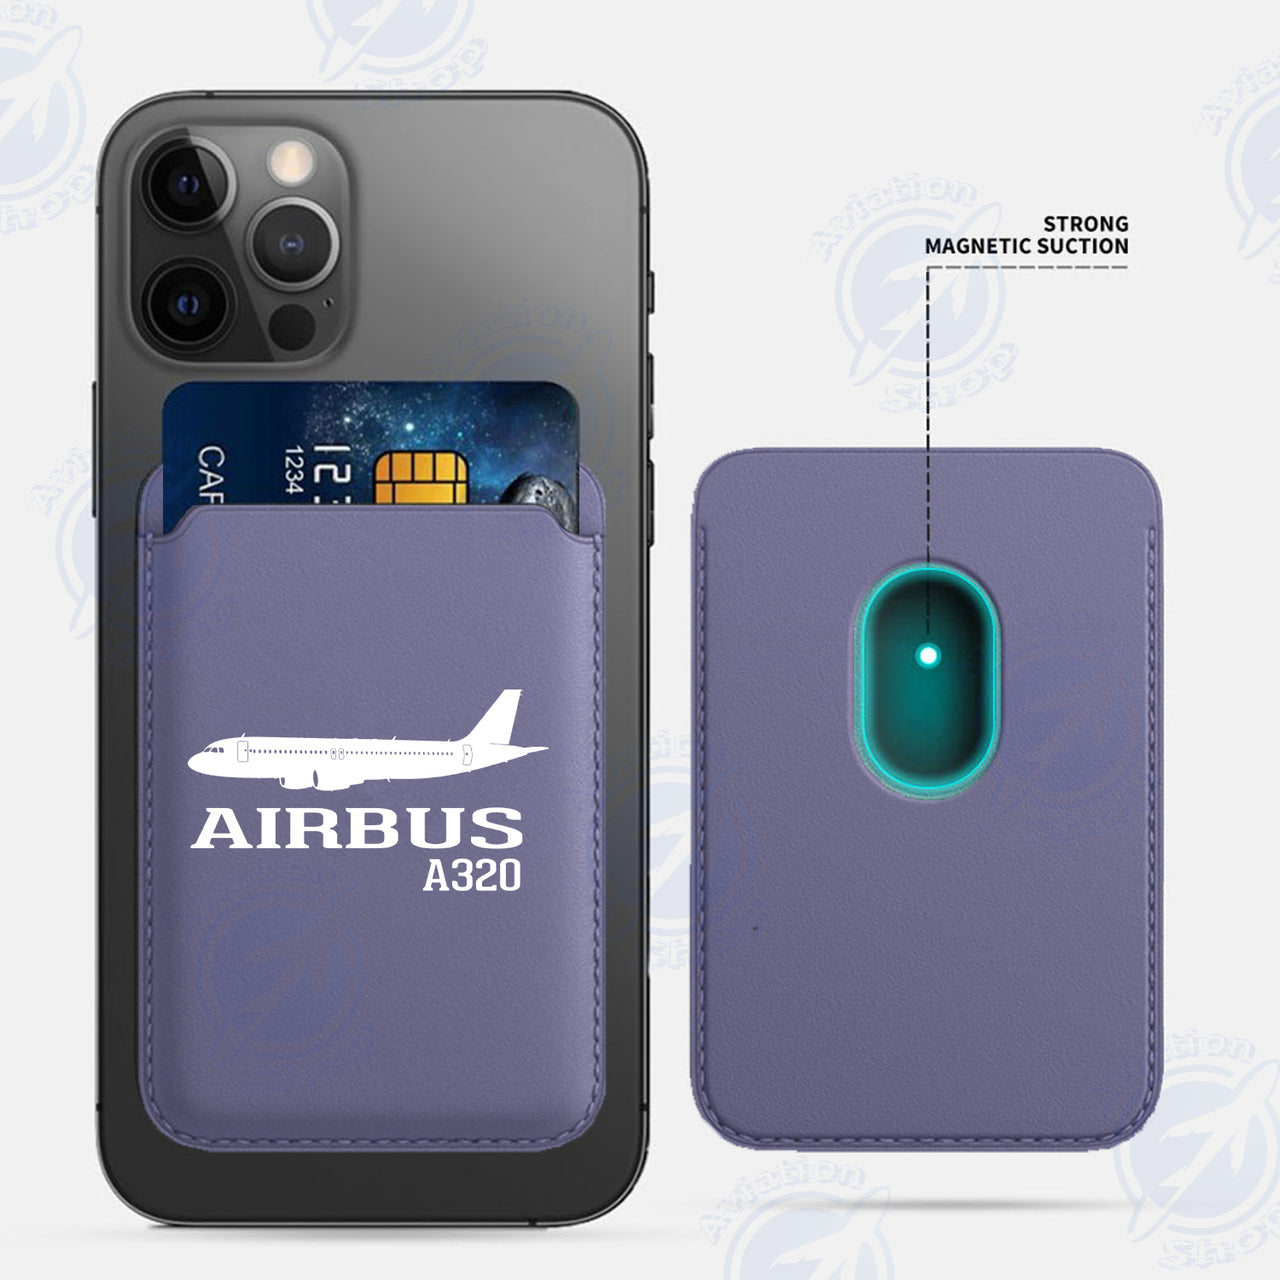 Airbus A320 Printed iPhone Cases Magnetic Card Wallet